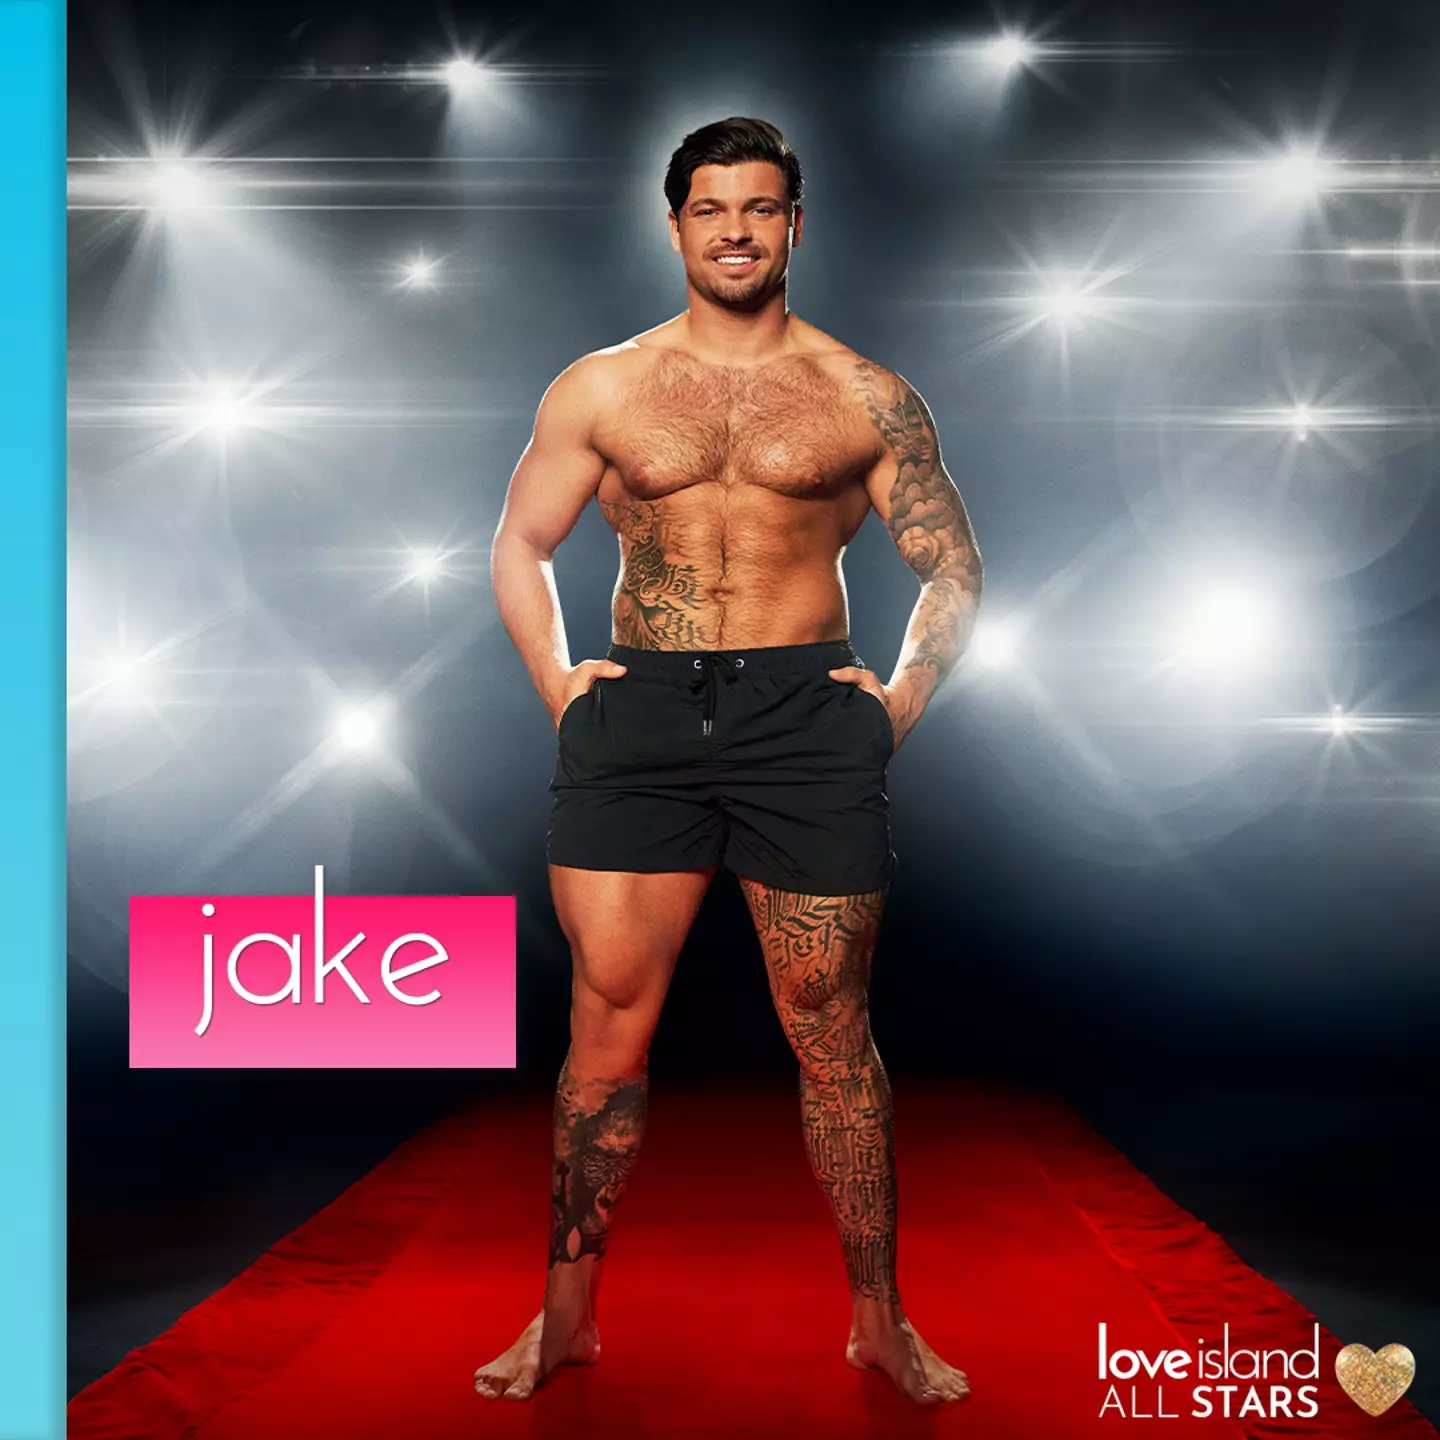 Love Island: All Stars will hit our screens next Monday (15 January).